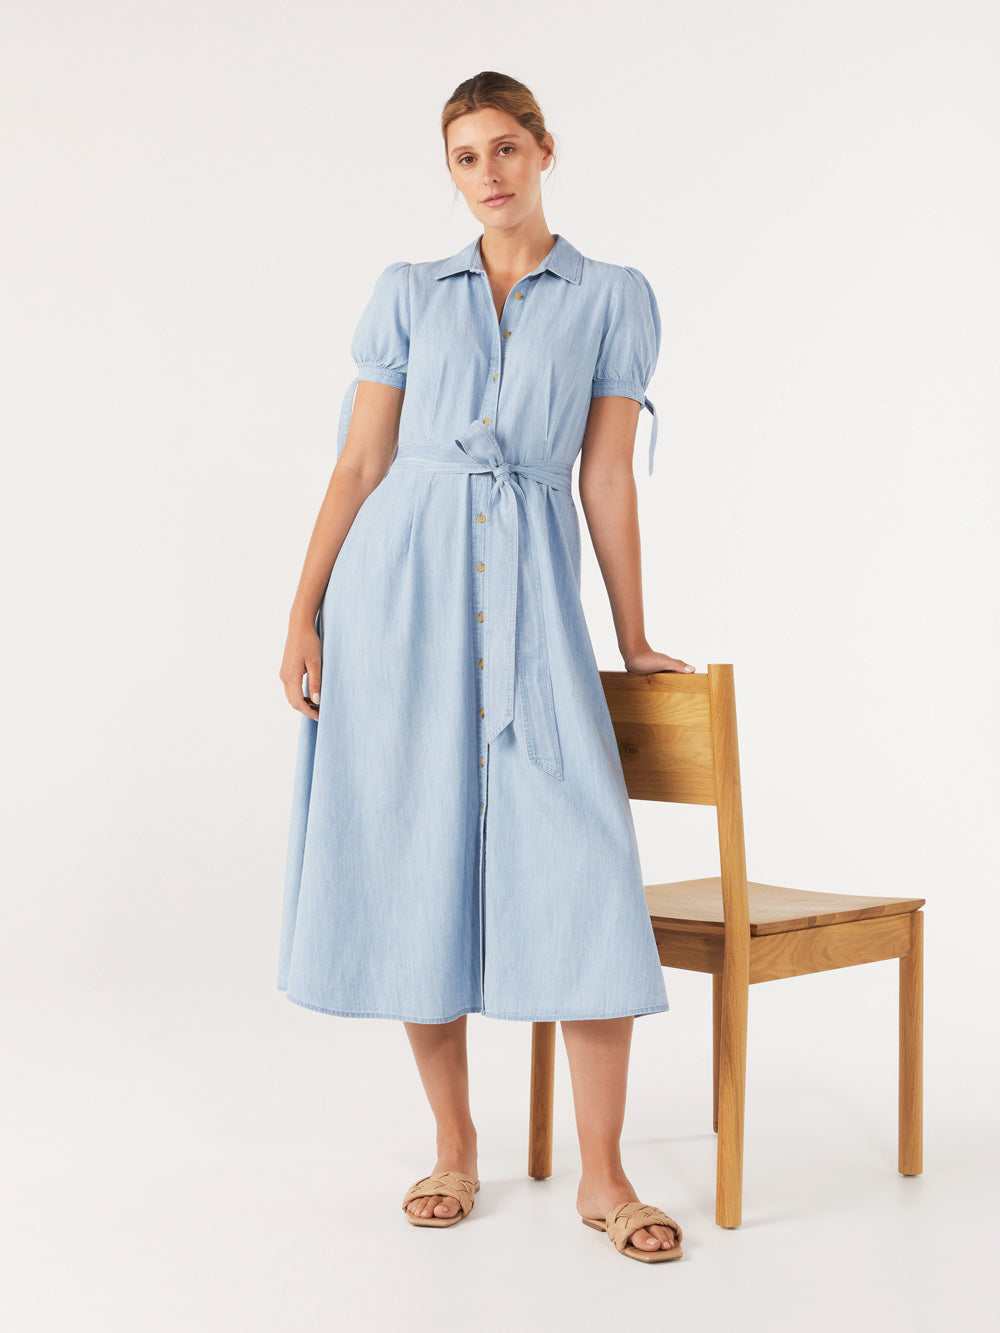 The Fit and Flare Chambray Dress